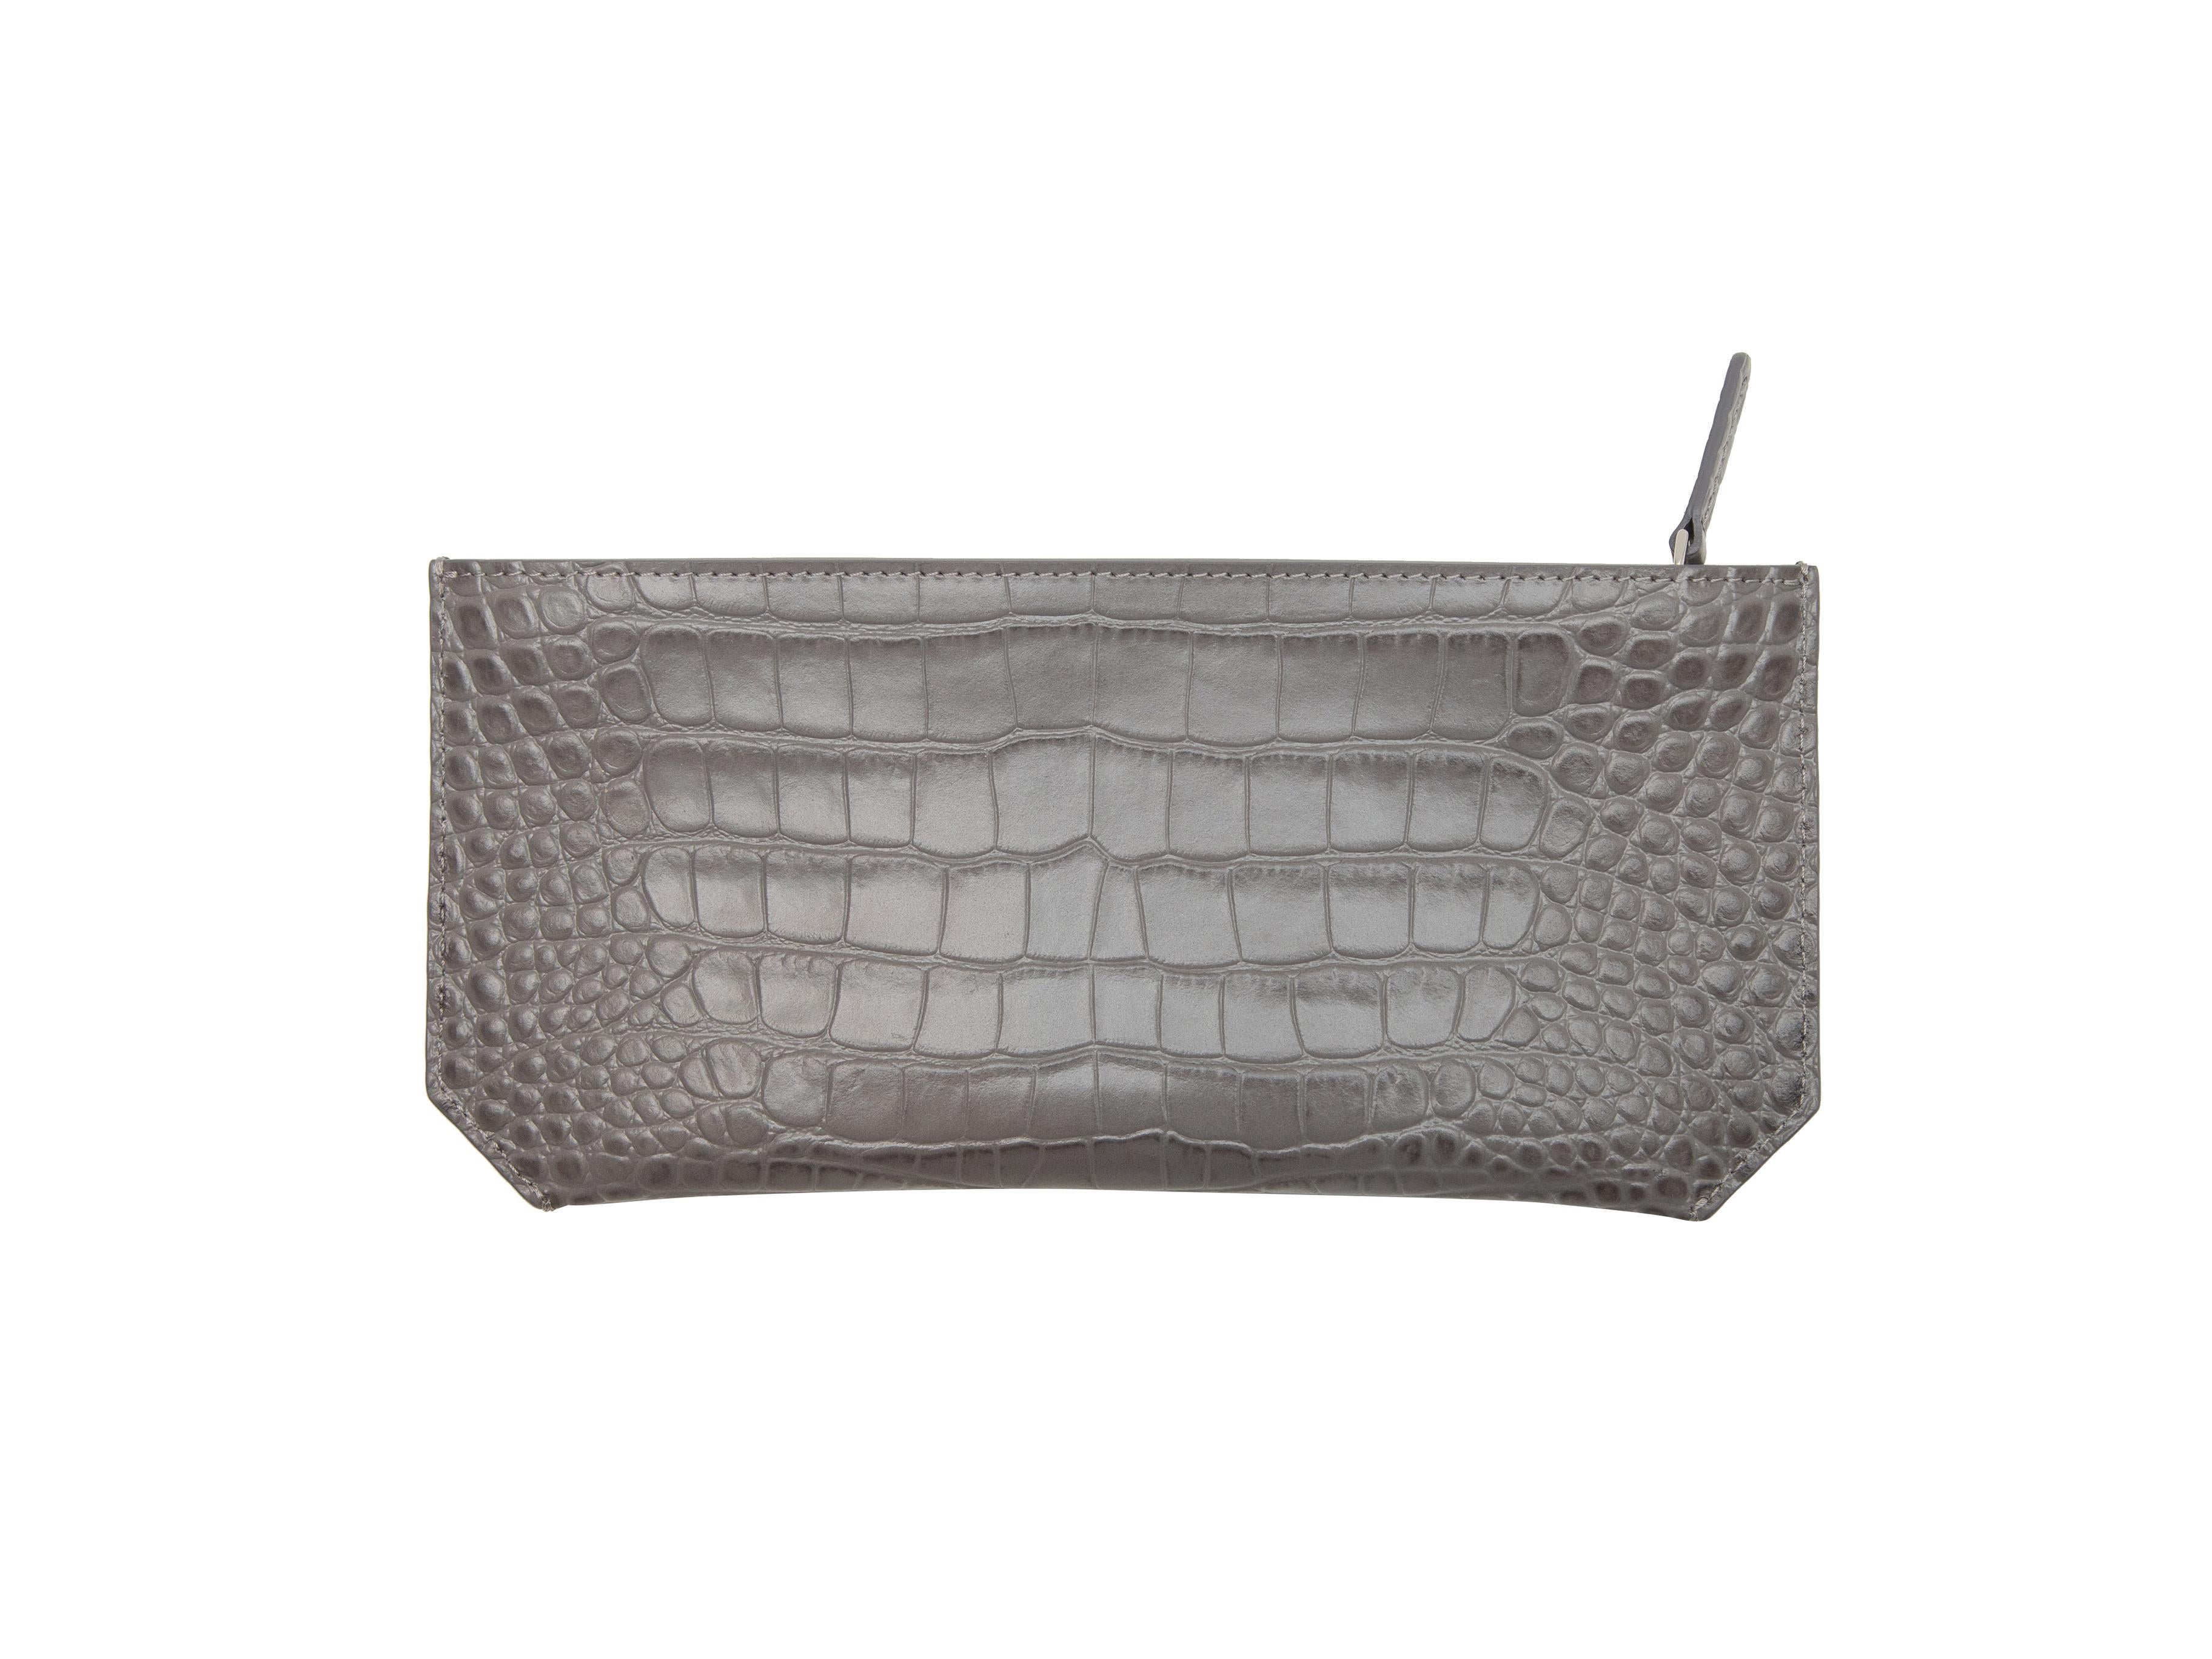 Product details: Storm grey 'Dragon' embossed leather Bracelet Pouch by Senreve. Silver-tone hardware. Zip closure at top. 4.75